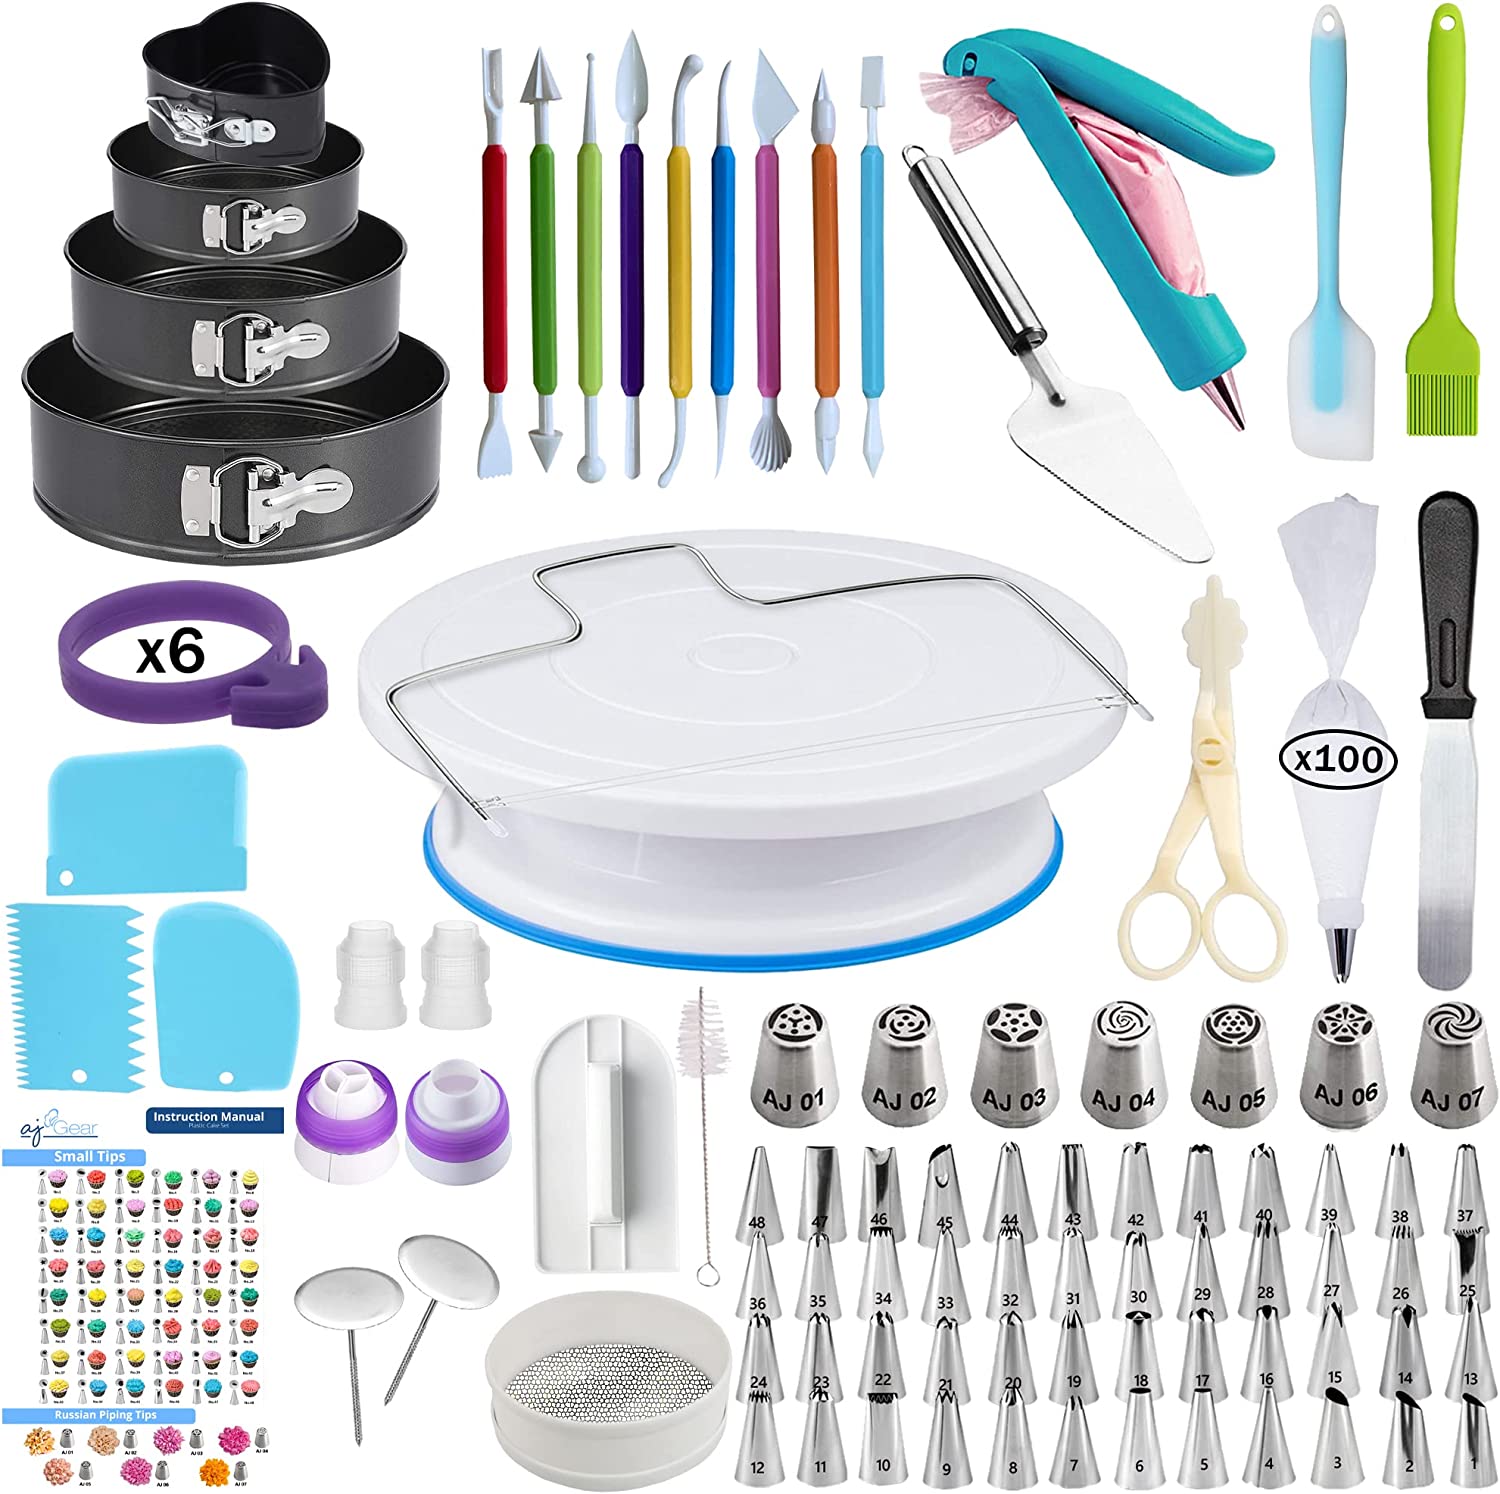 Cake Decorating Tools For The Advanced Cake Decorator